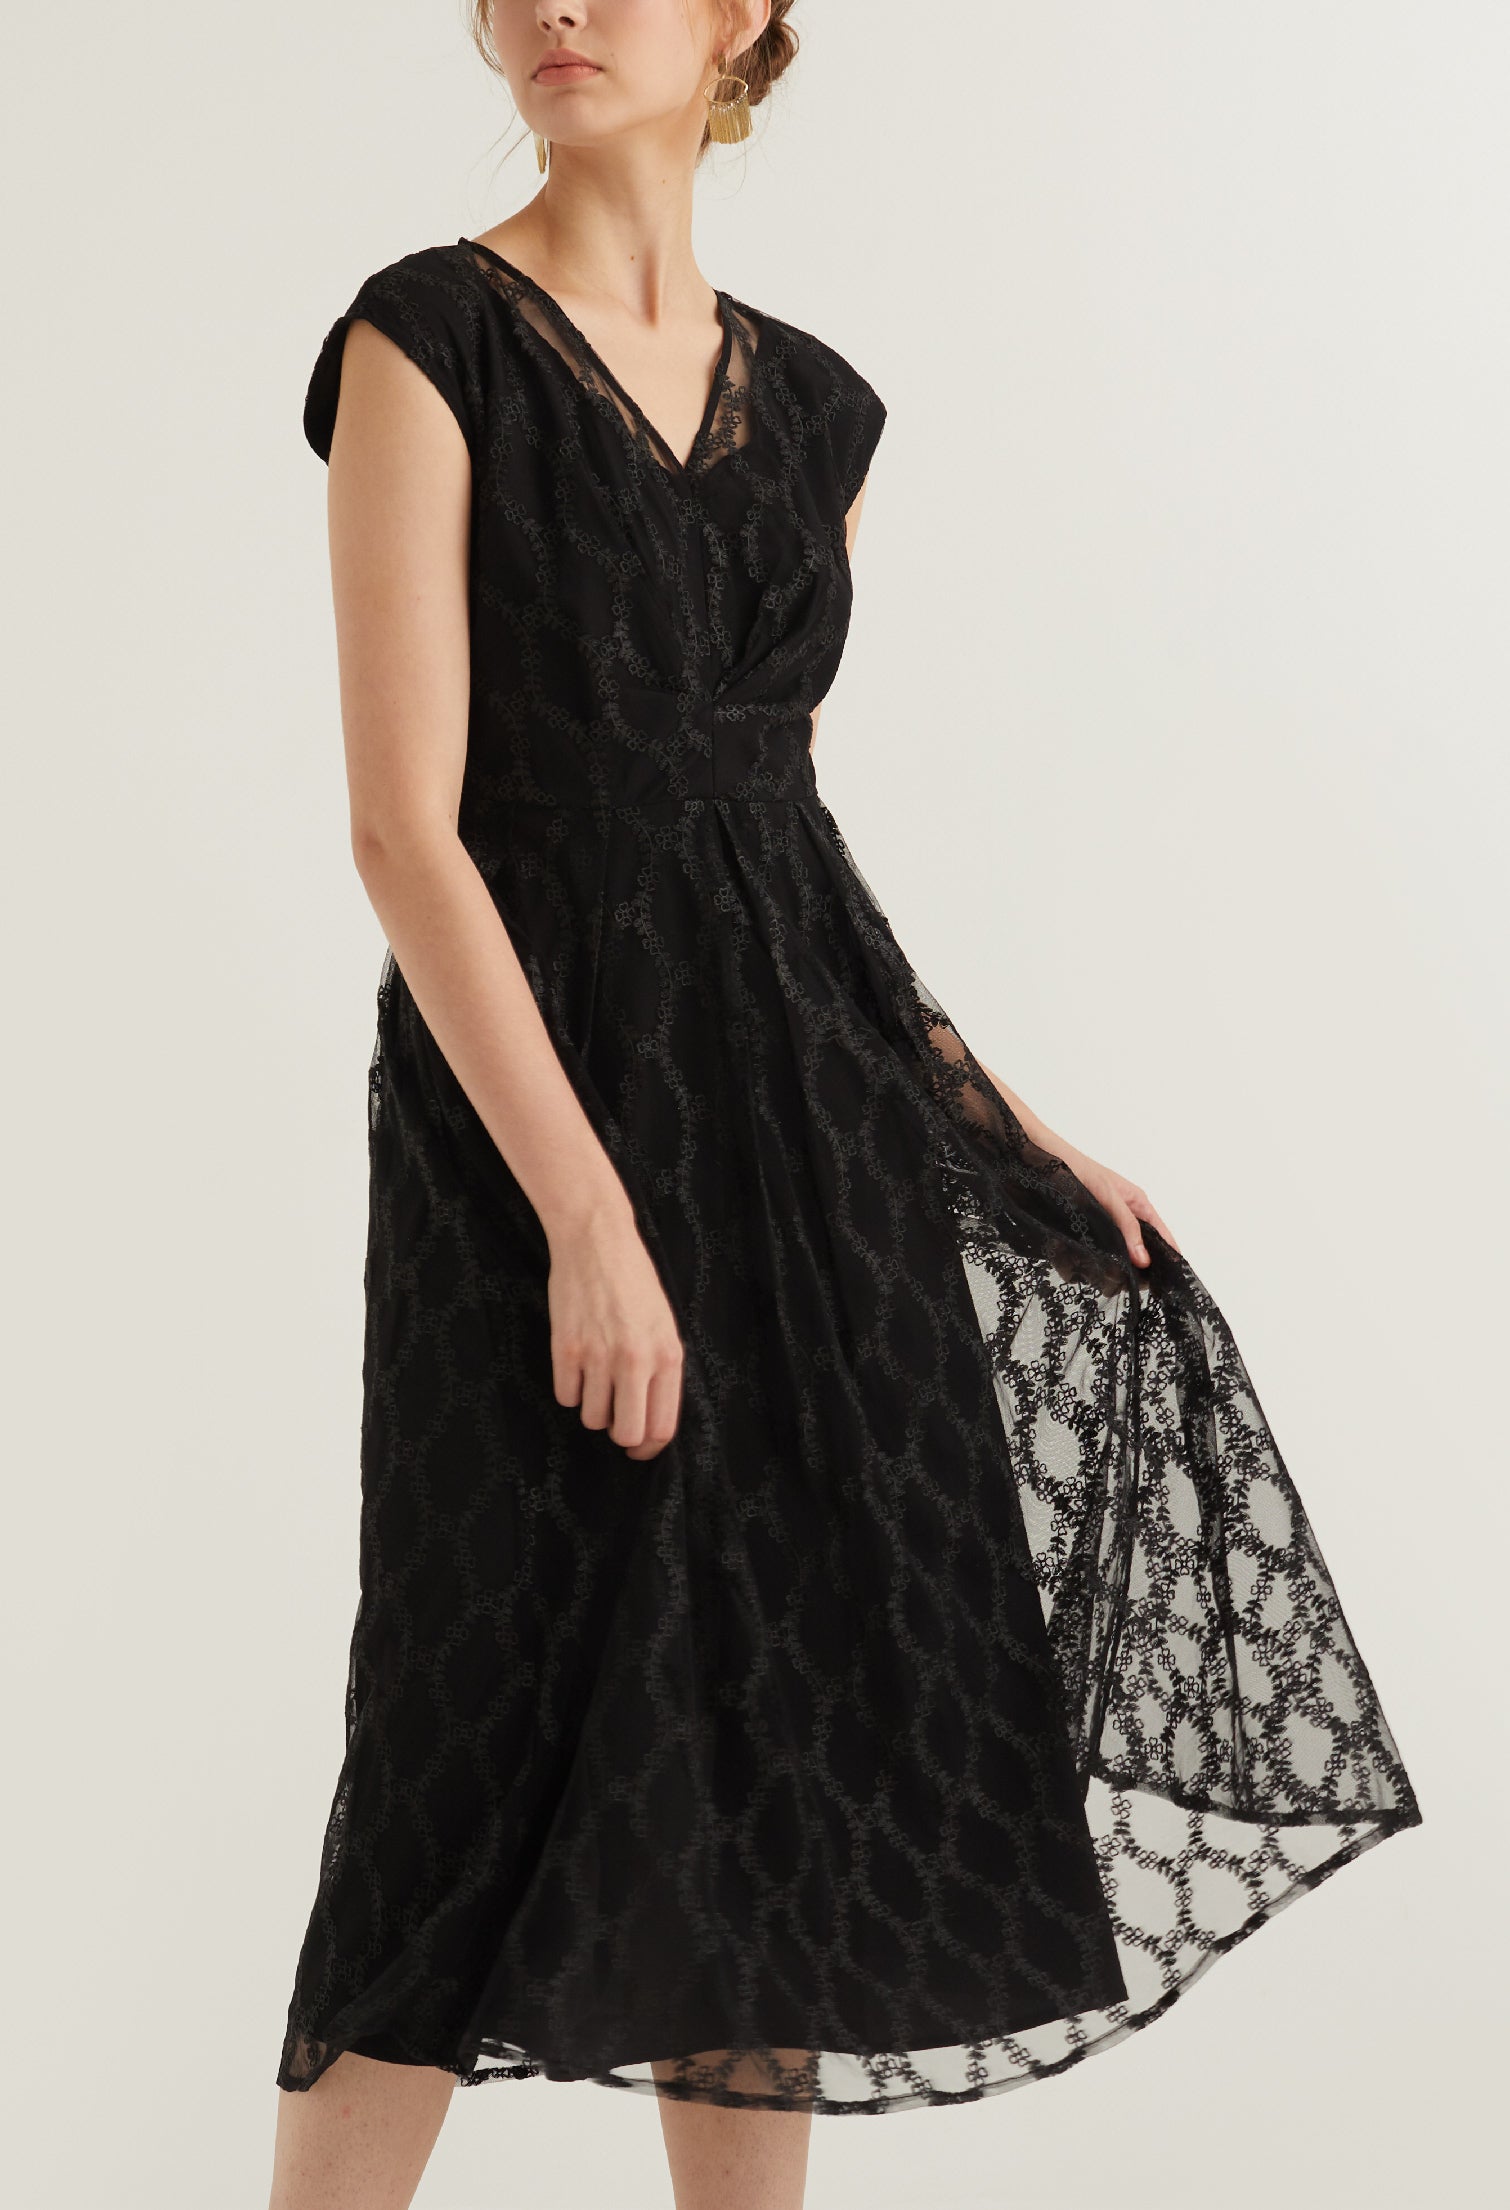 See Through Lace Detail Party Dress